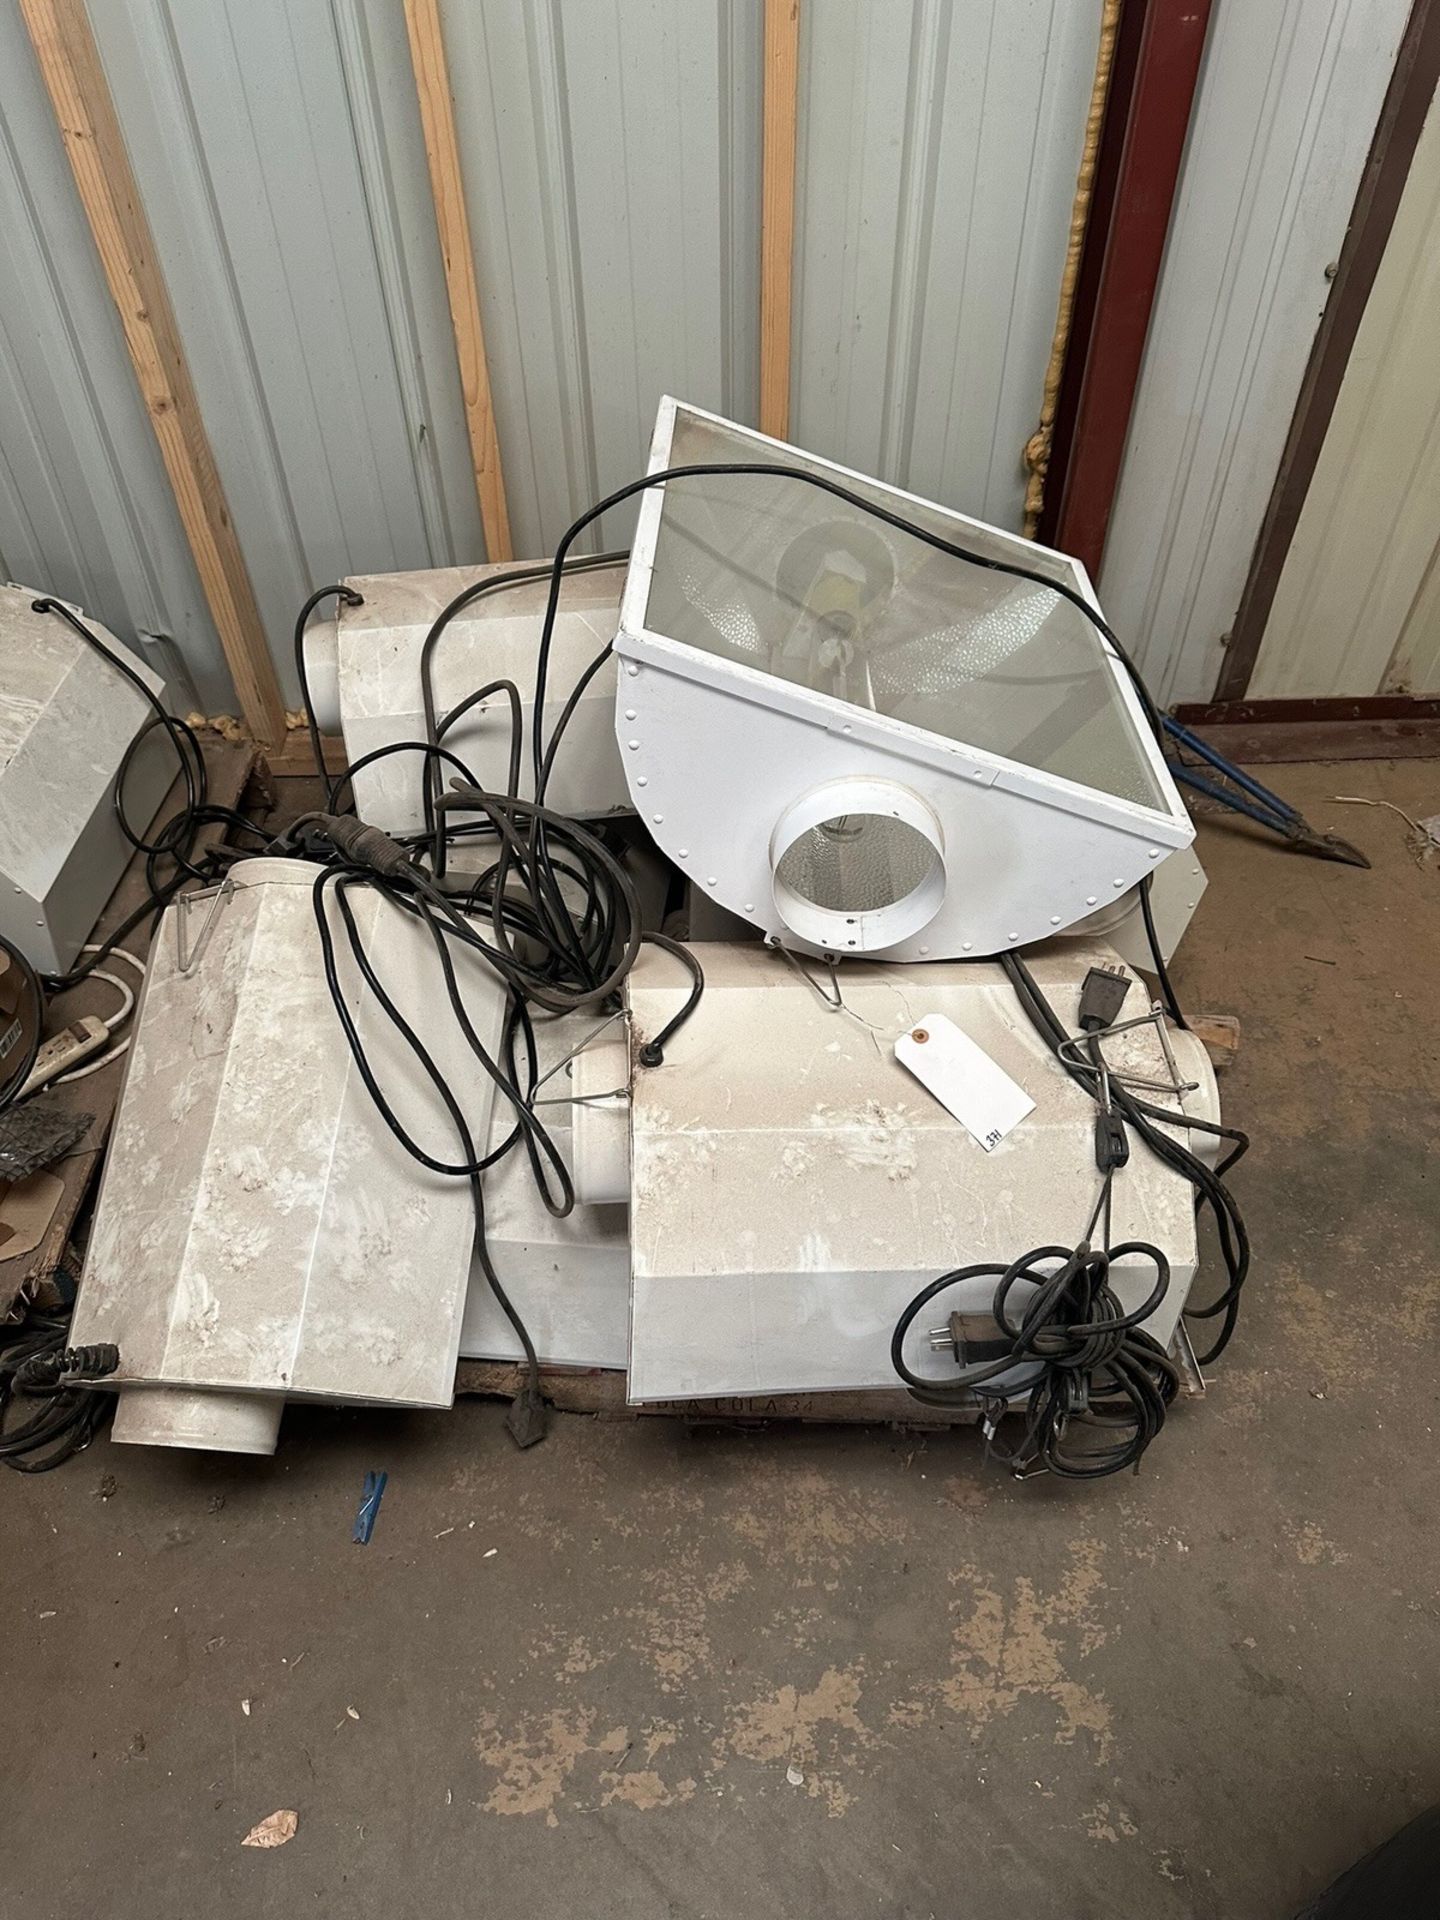 Pallets of Grow Lights And Power Supply | Rig Fee $35 - Image 2 of 5